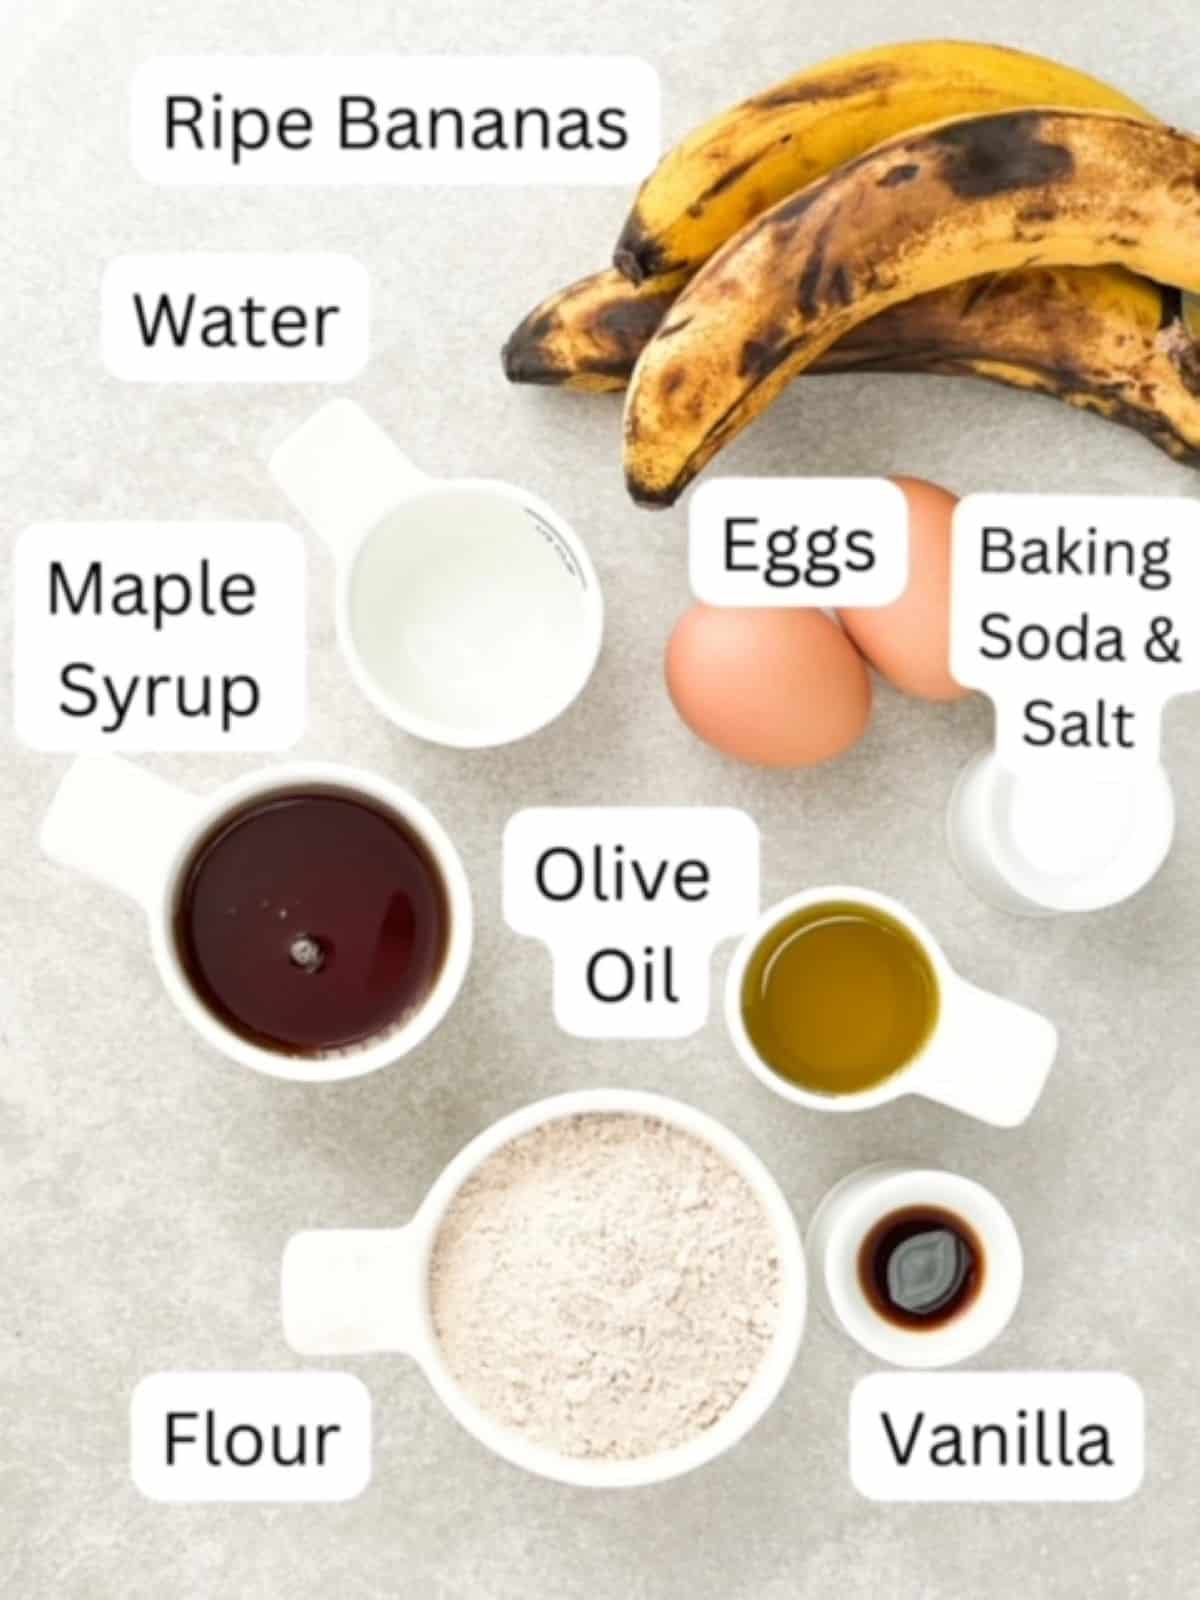 Dairy-Free Banana Bread Ingredients labeled. One bunch of ripe bananas, water, maple syrup, flour, and olive oil in separate white measuring cups, vanilla in a small white prep container, baking soda and salt in a small white prep container, and two brown eggs.